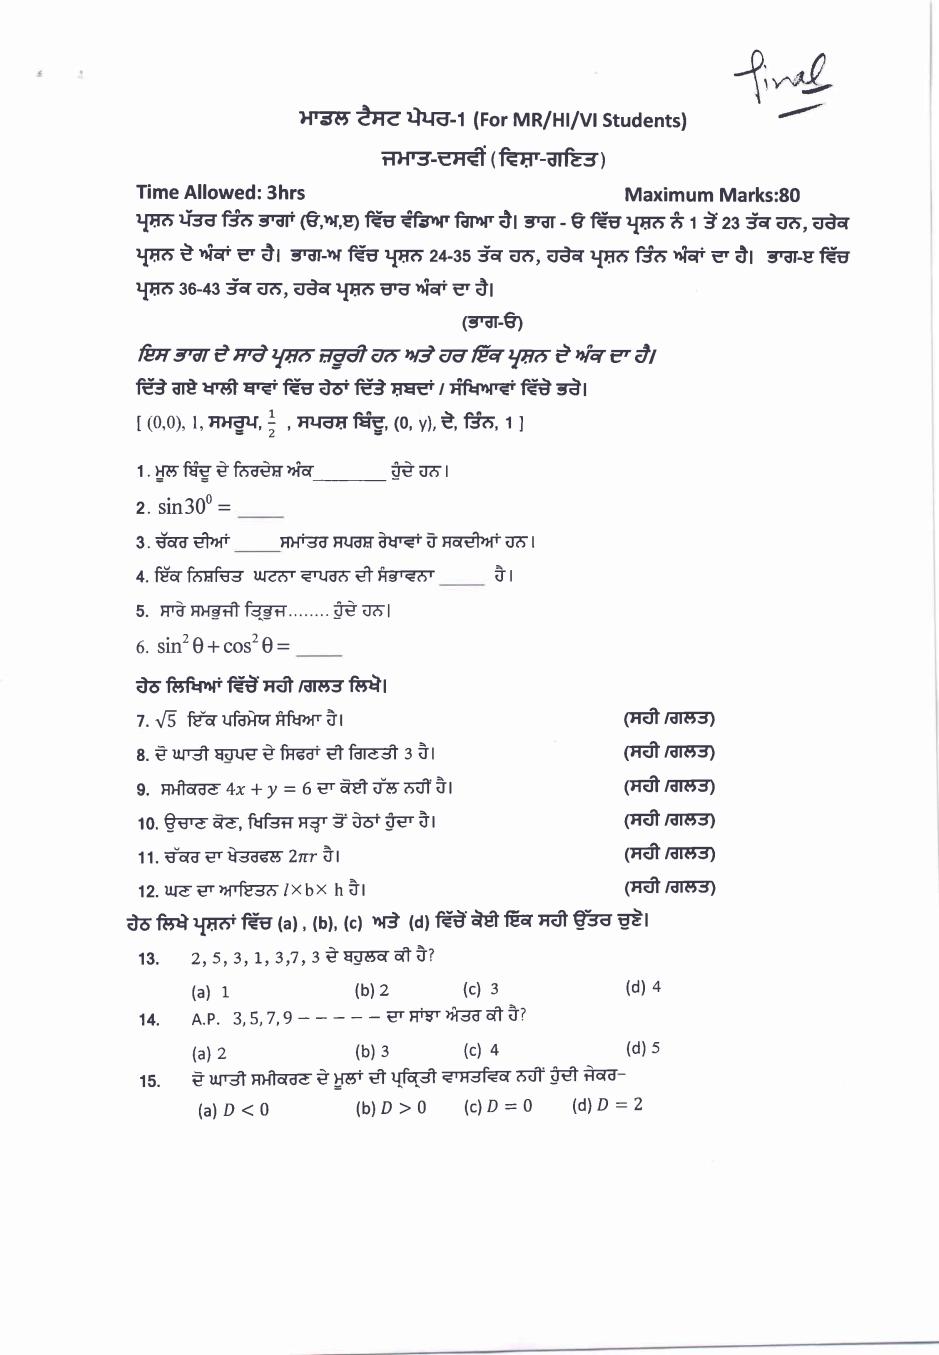 PSEB 10th Model Test Paper of Maths (Paper-2) - Page 1